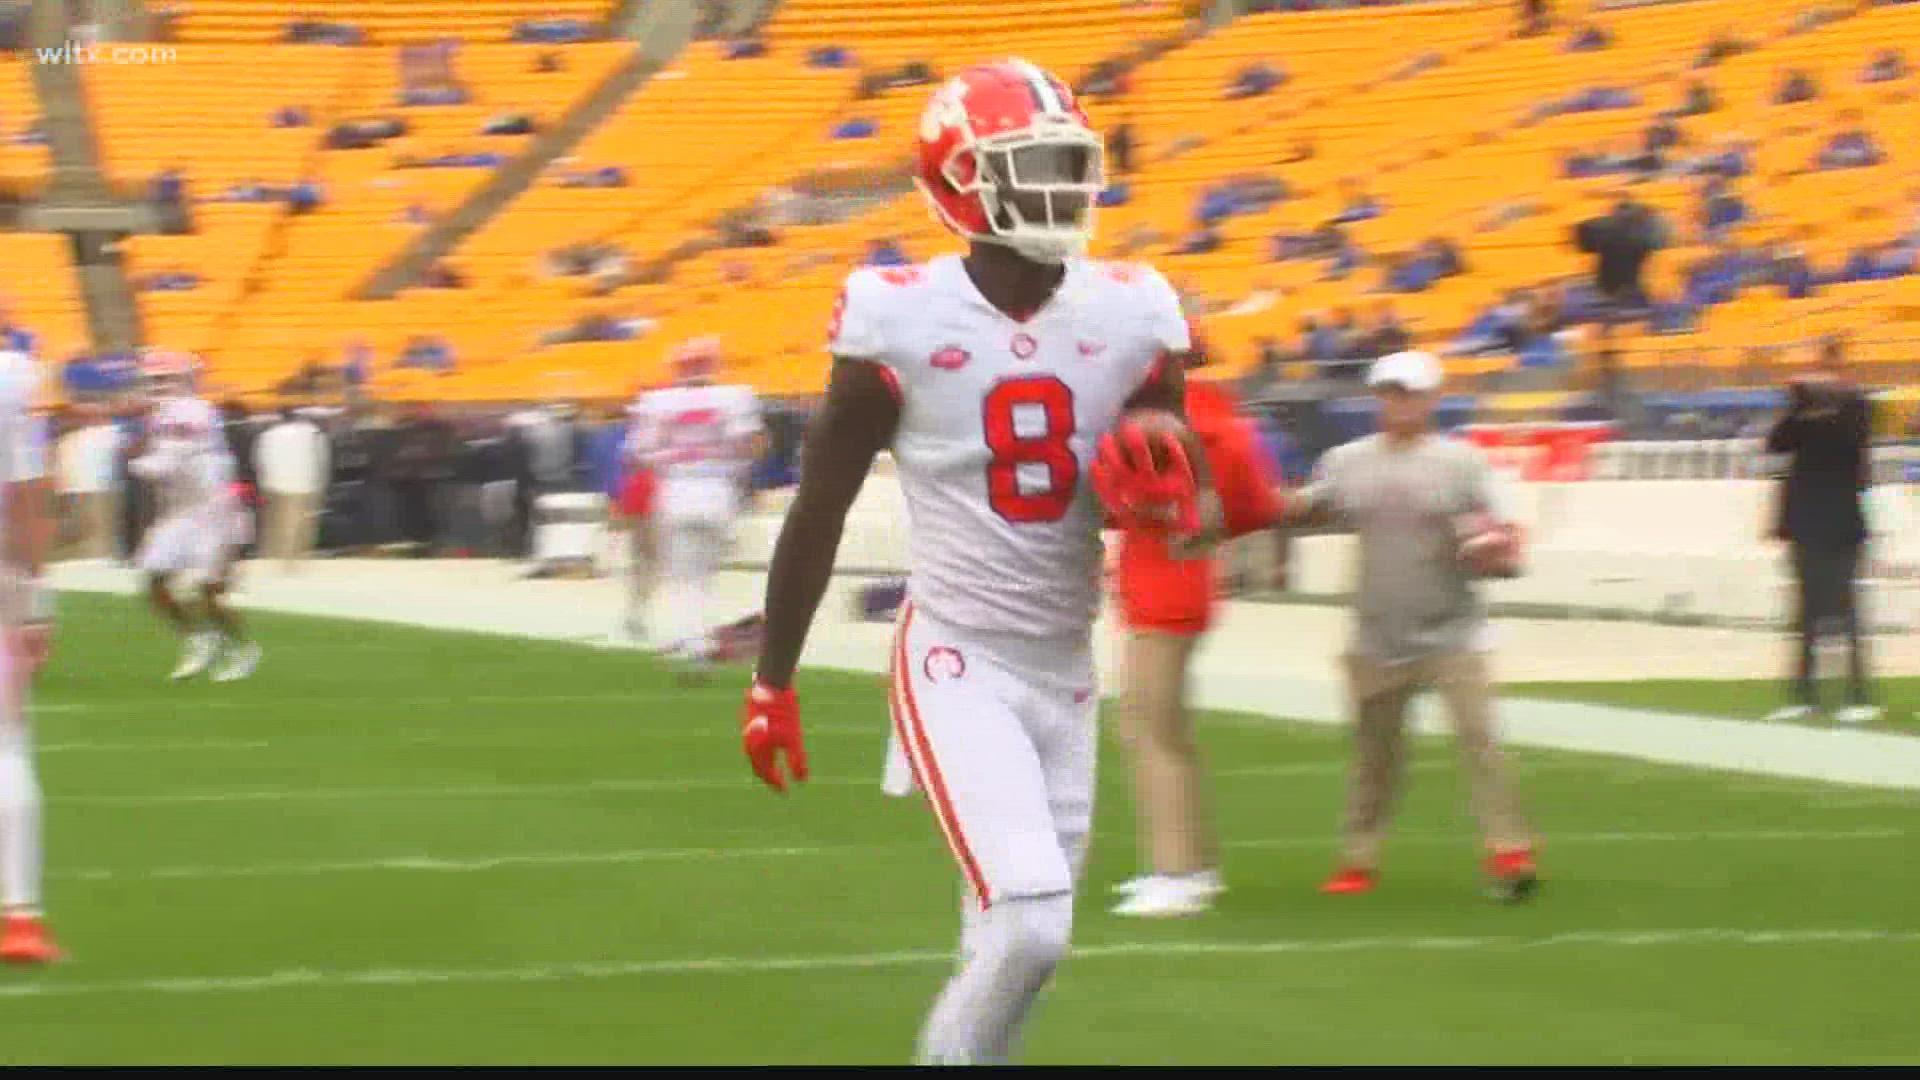 Clemson head football coach Dabo Swinney provides insight as to how Justyn Ross ended up in the Kansas City Chiefs organization and what he will bring to that team.